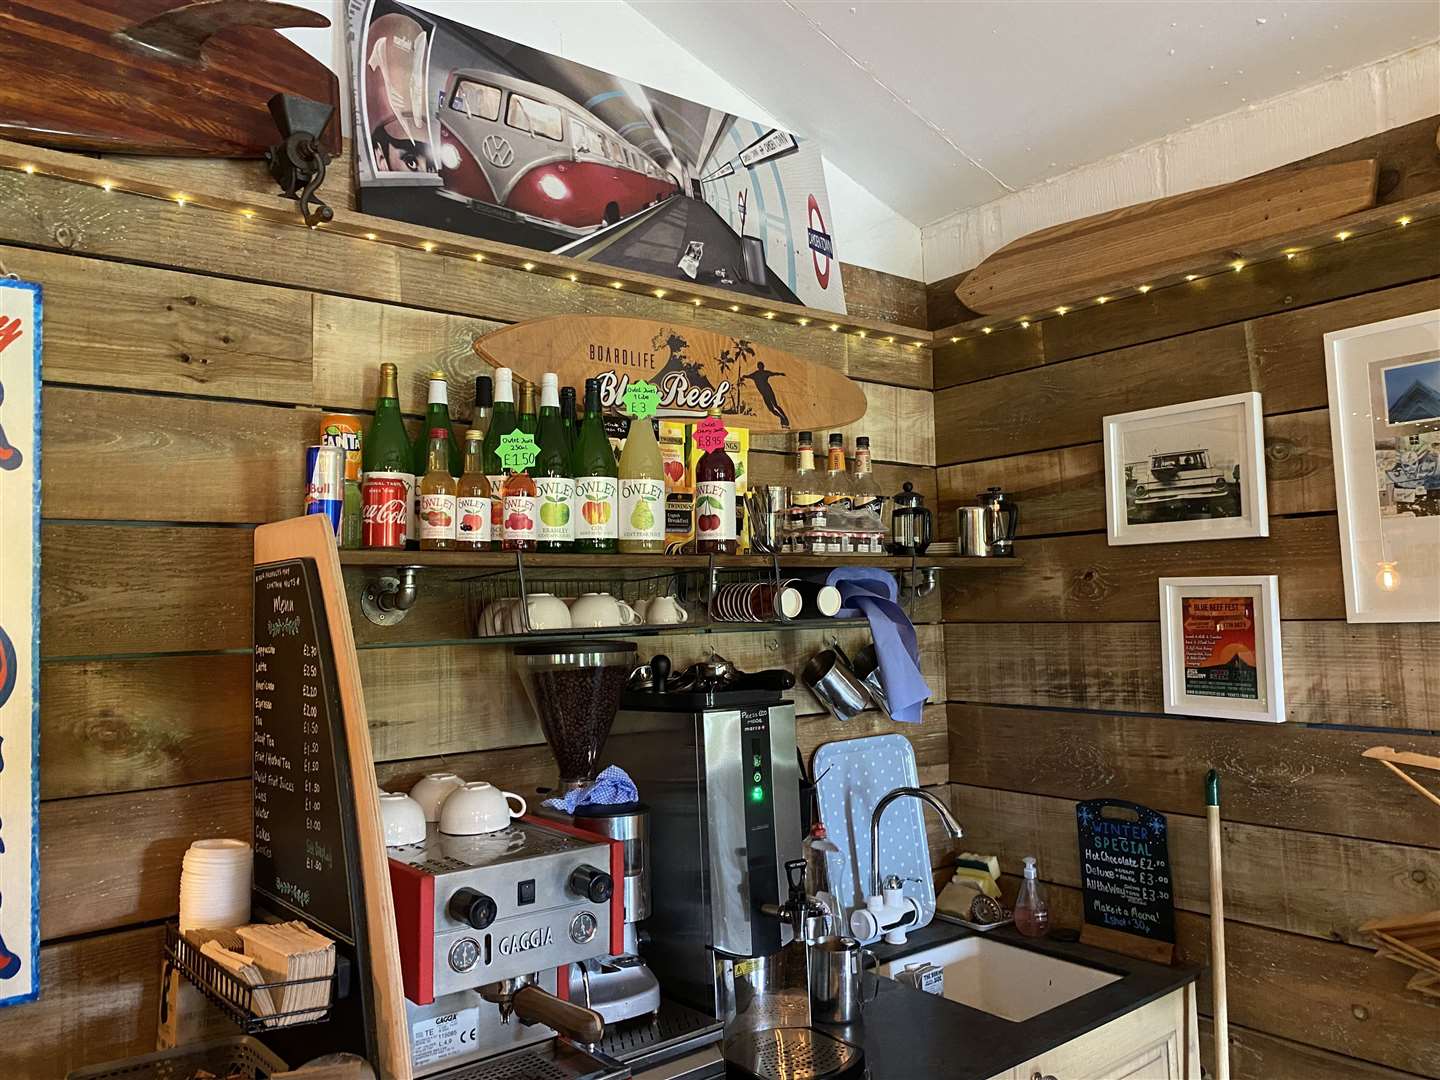 Blue Reef skate shop also has a café where passionate enthusiasts can meet